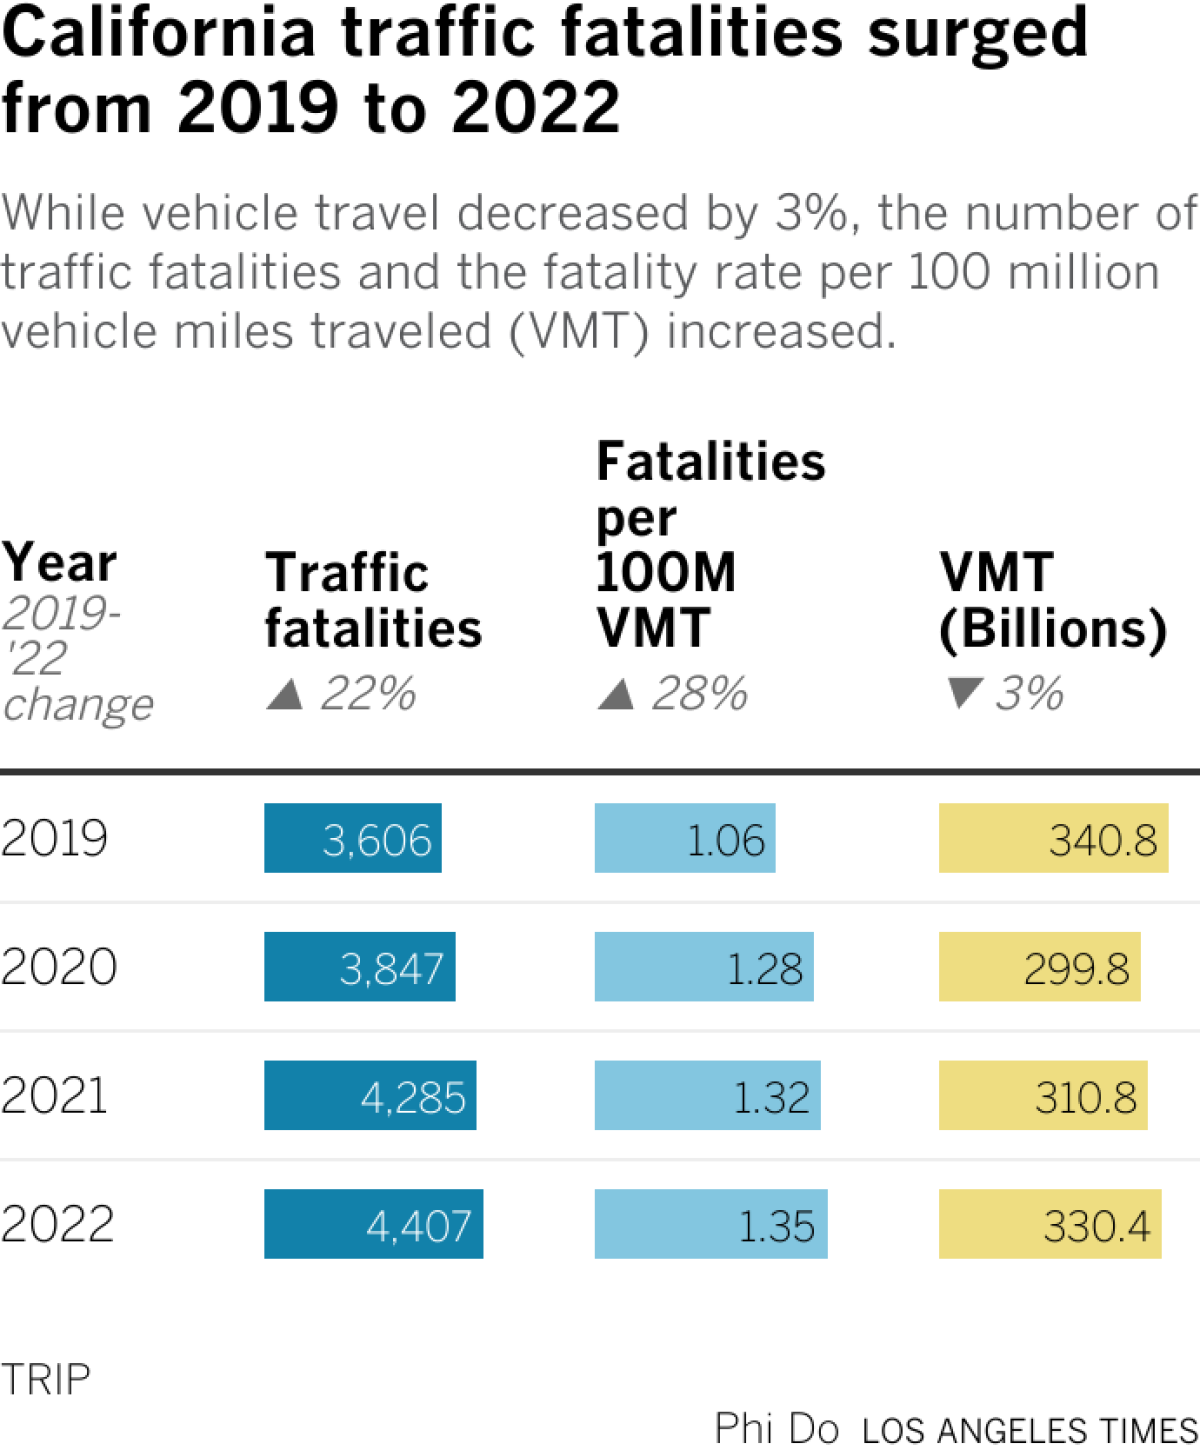 Table showing how traffic fatalities, vehicle miles traveled (VMT) and fatality rate per 100 million VMT changed from 2019 to 2022 in California